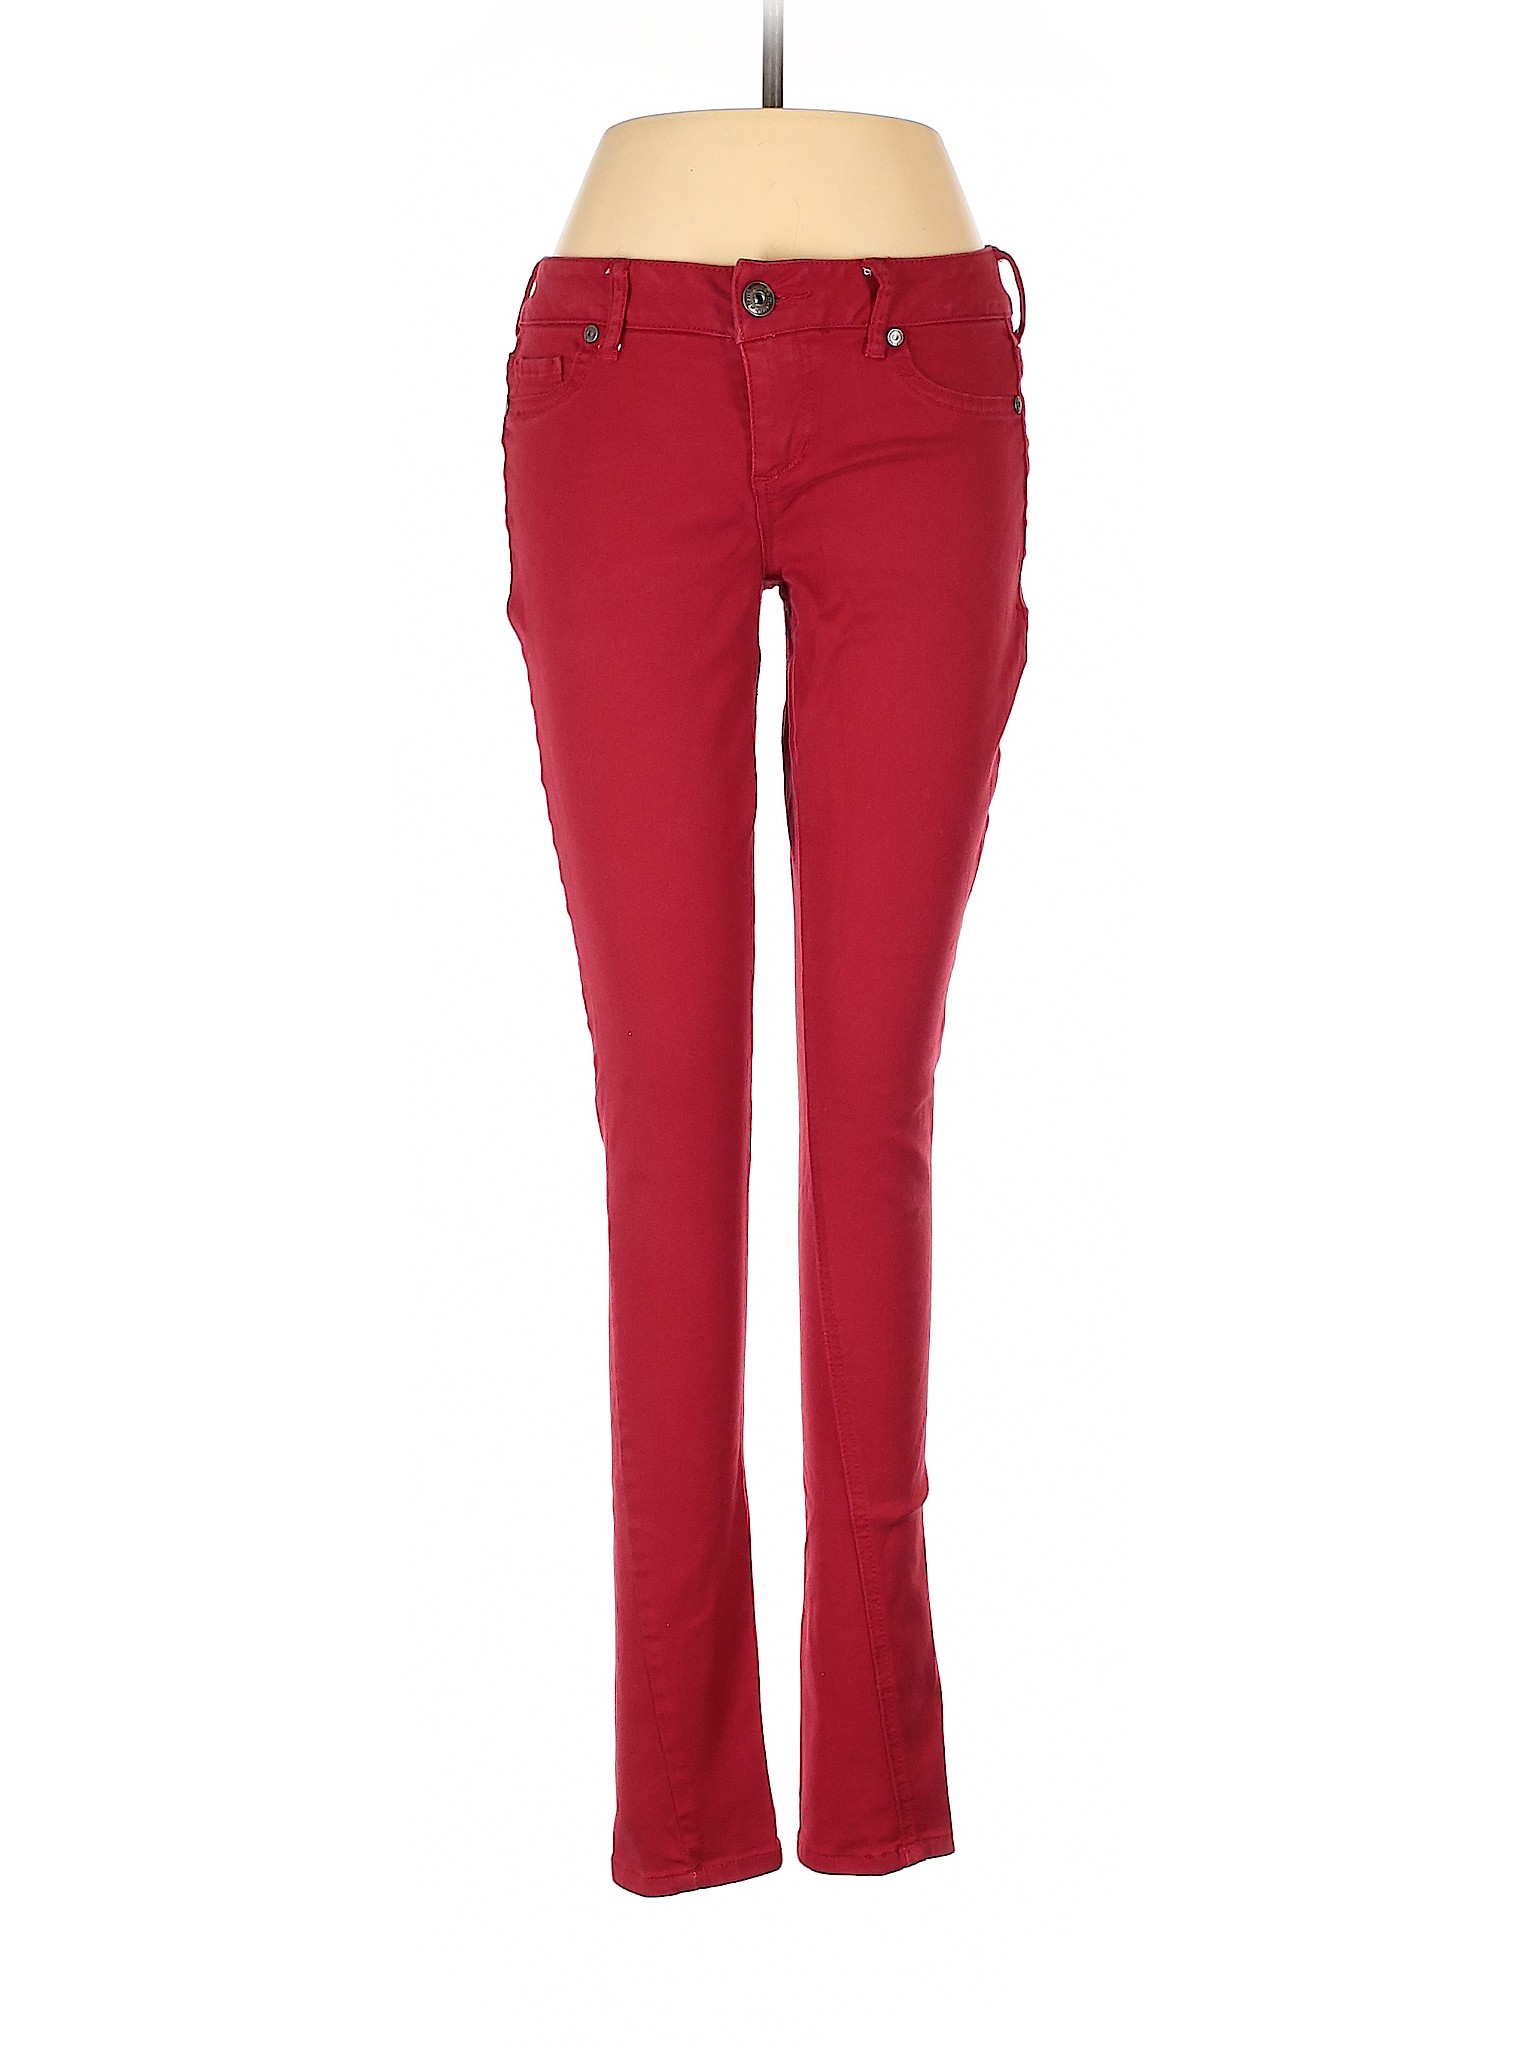 Maurices Women Red Jeggings S | eBay